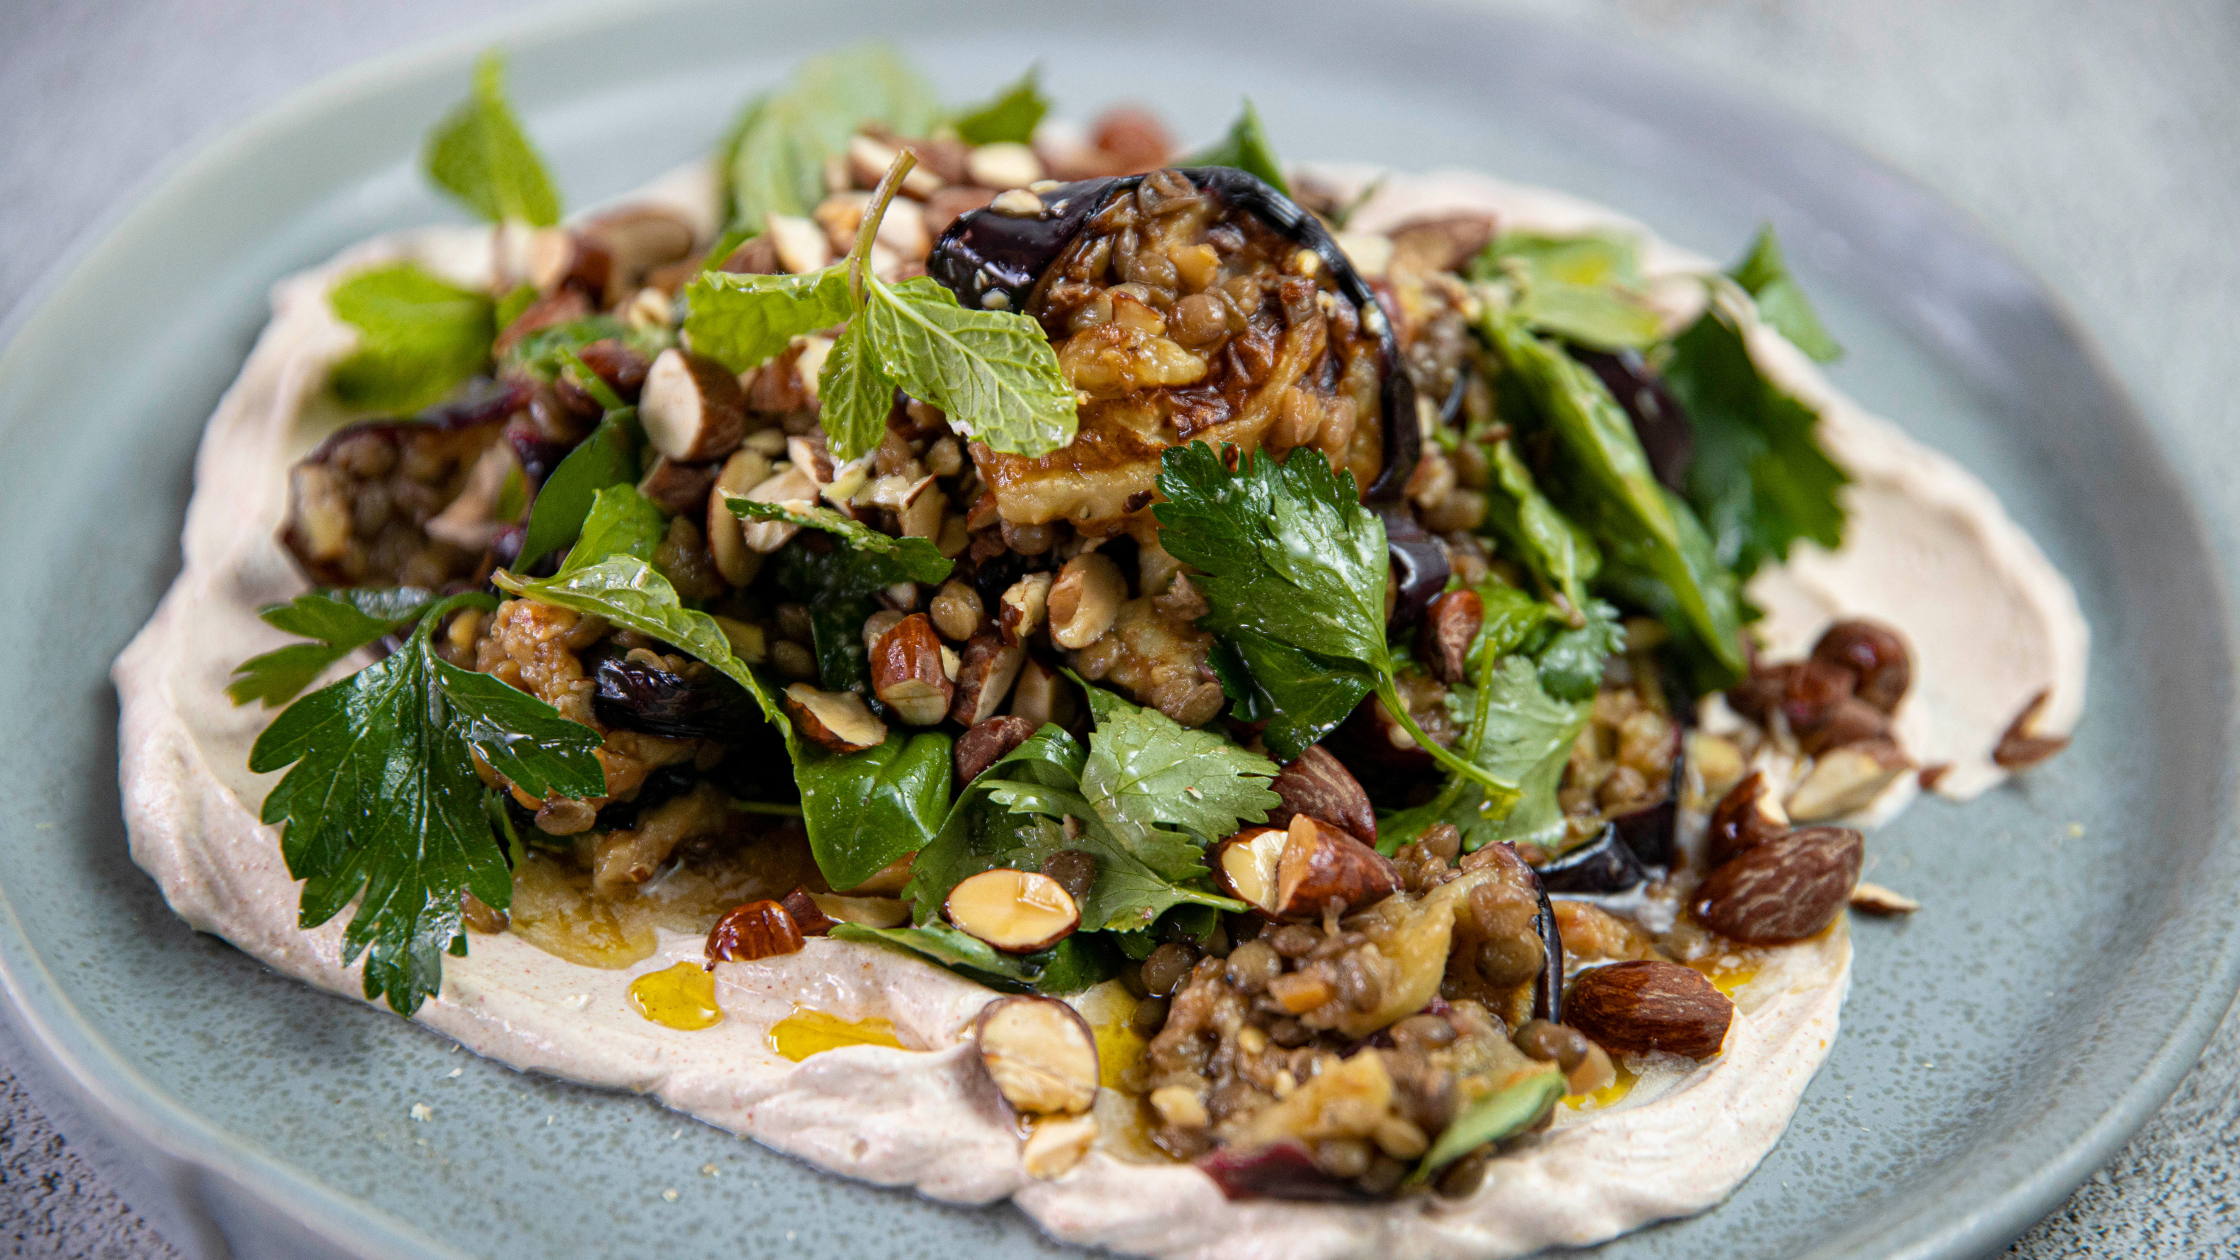 Grilled Eggplant Salad with Smoked Almonds